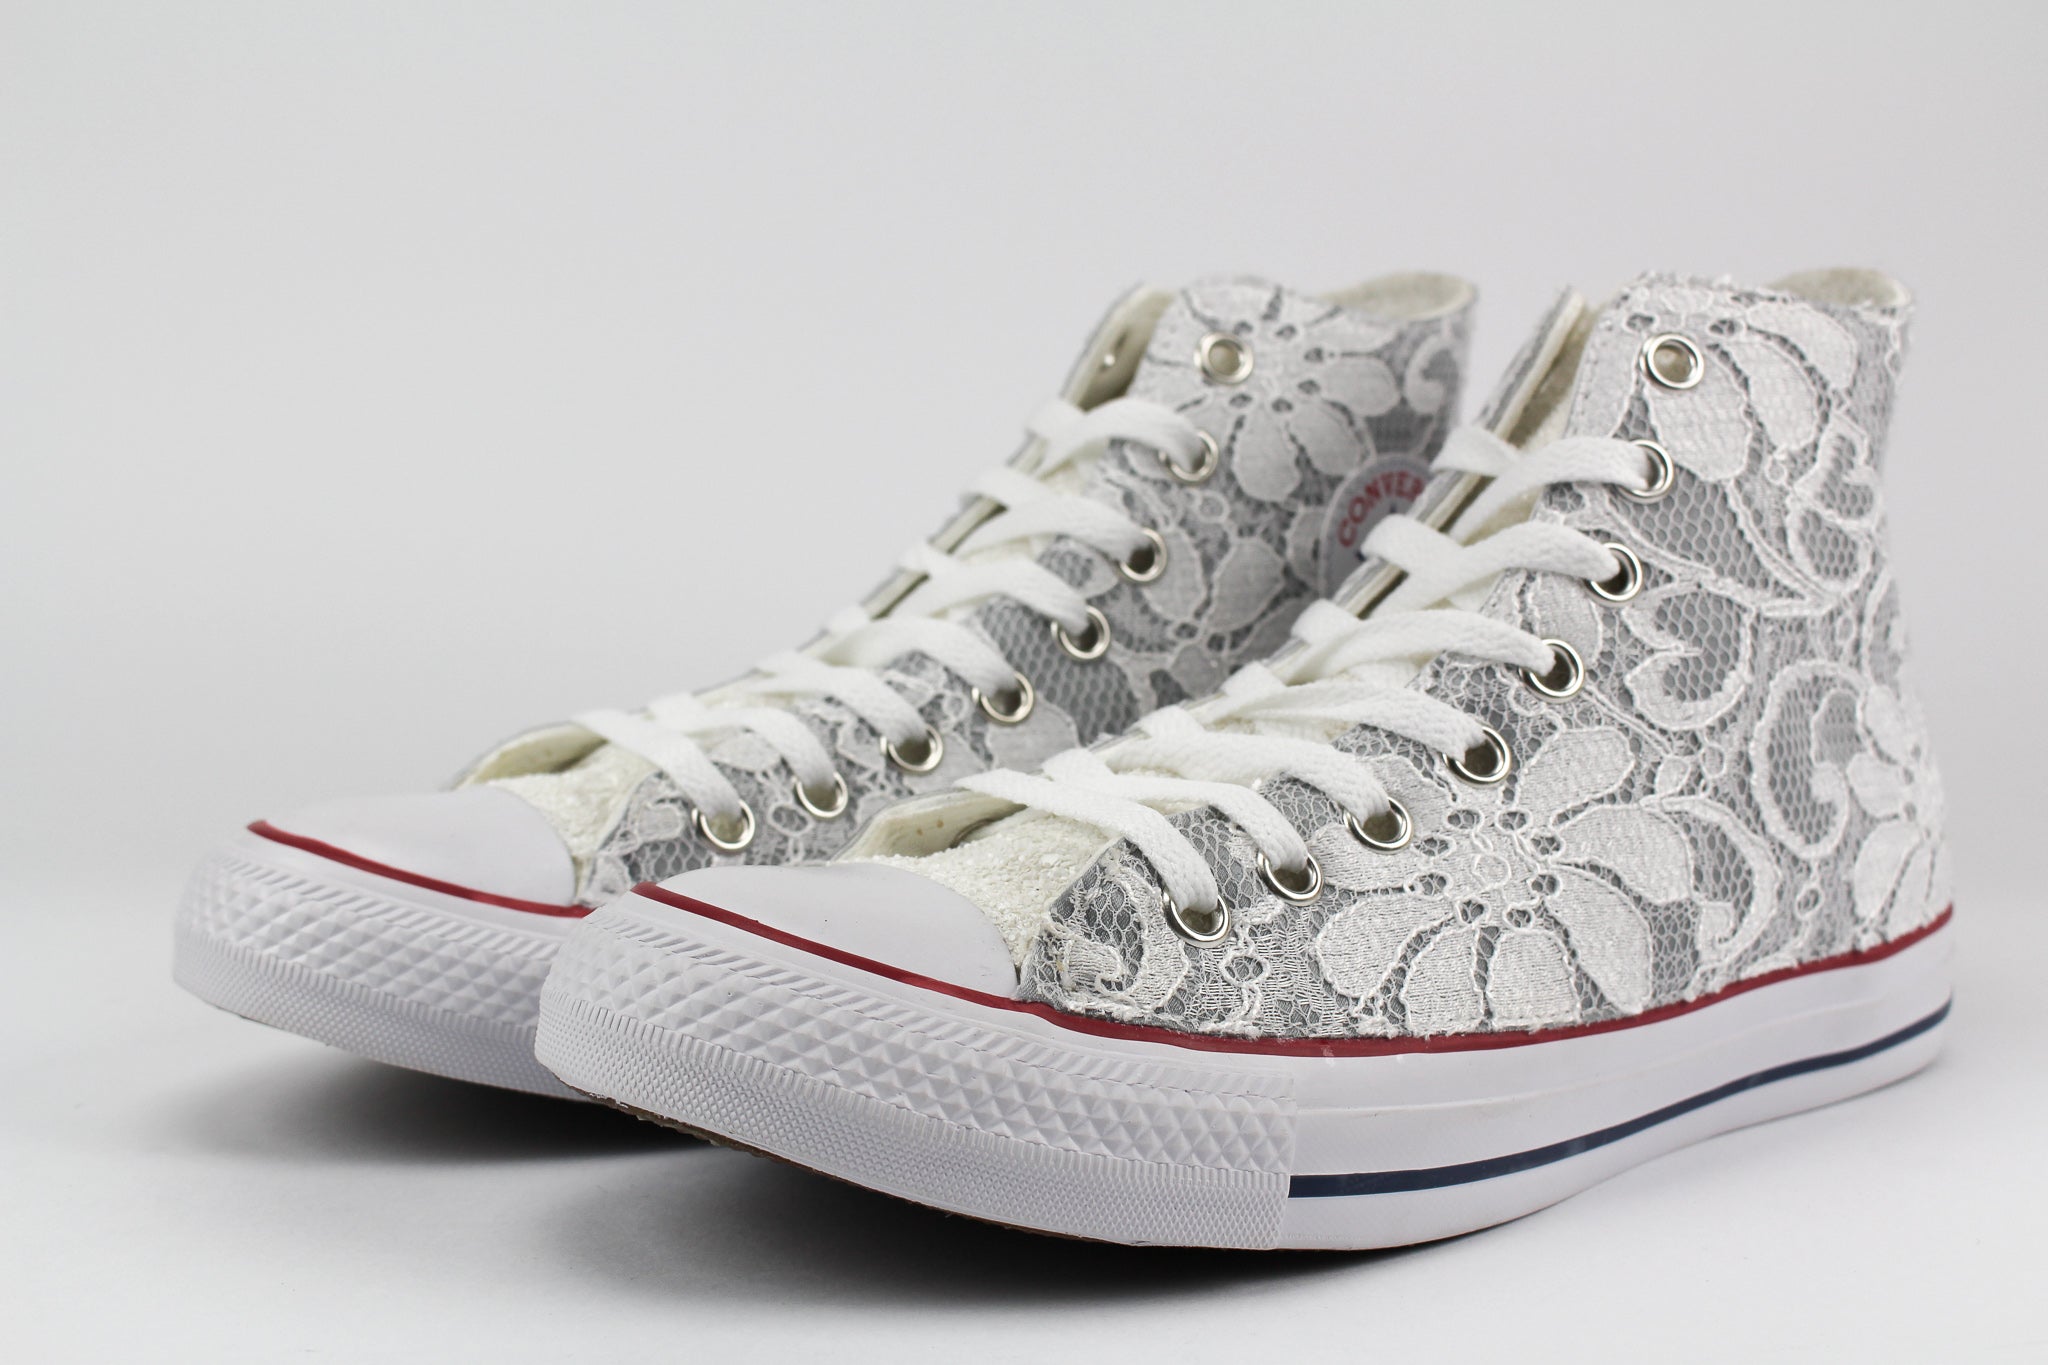 Converse All Star White Pizzo